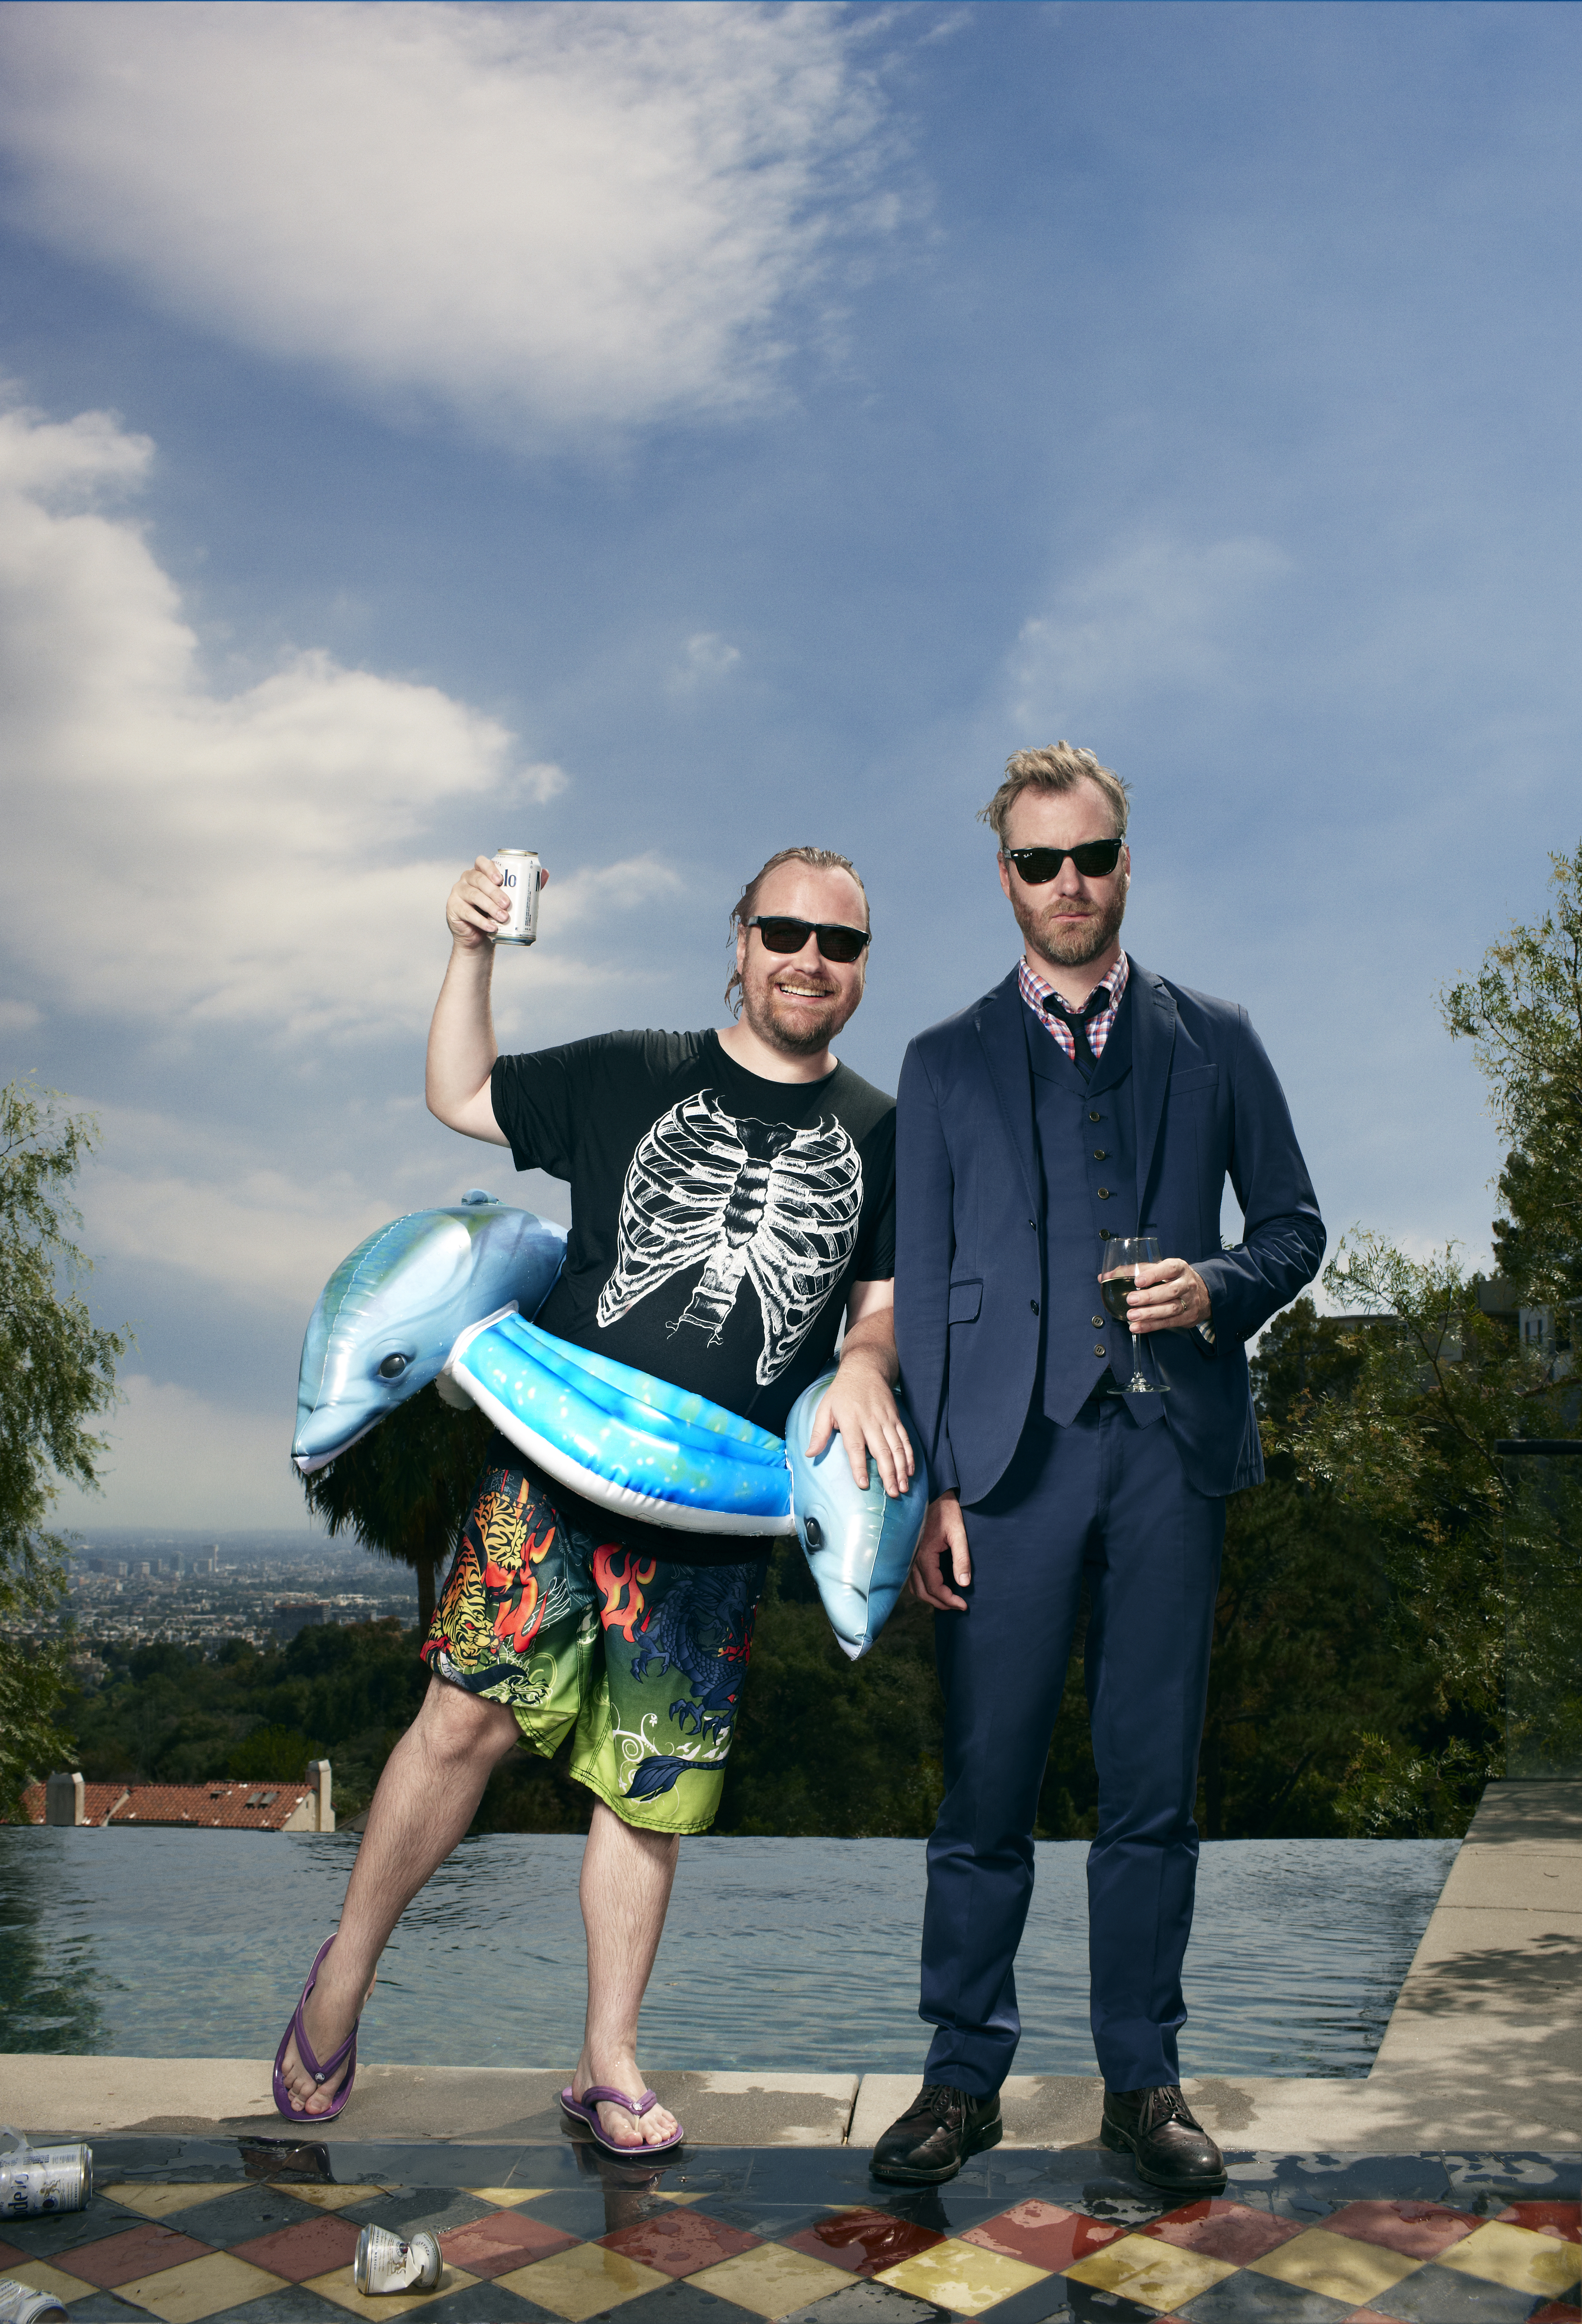 Can you guess which Berninger brother is which?